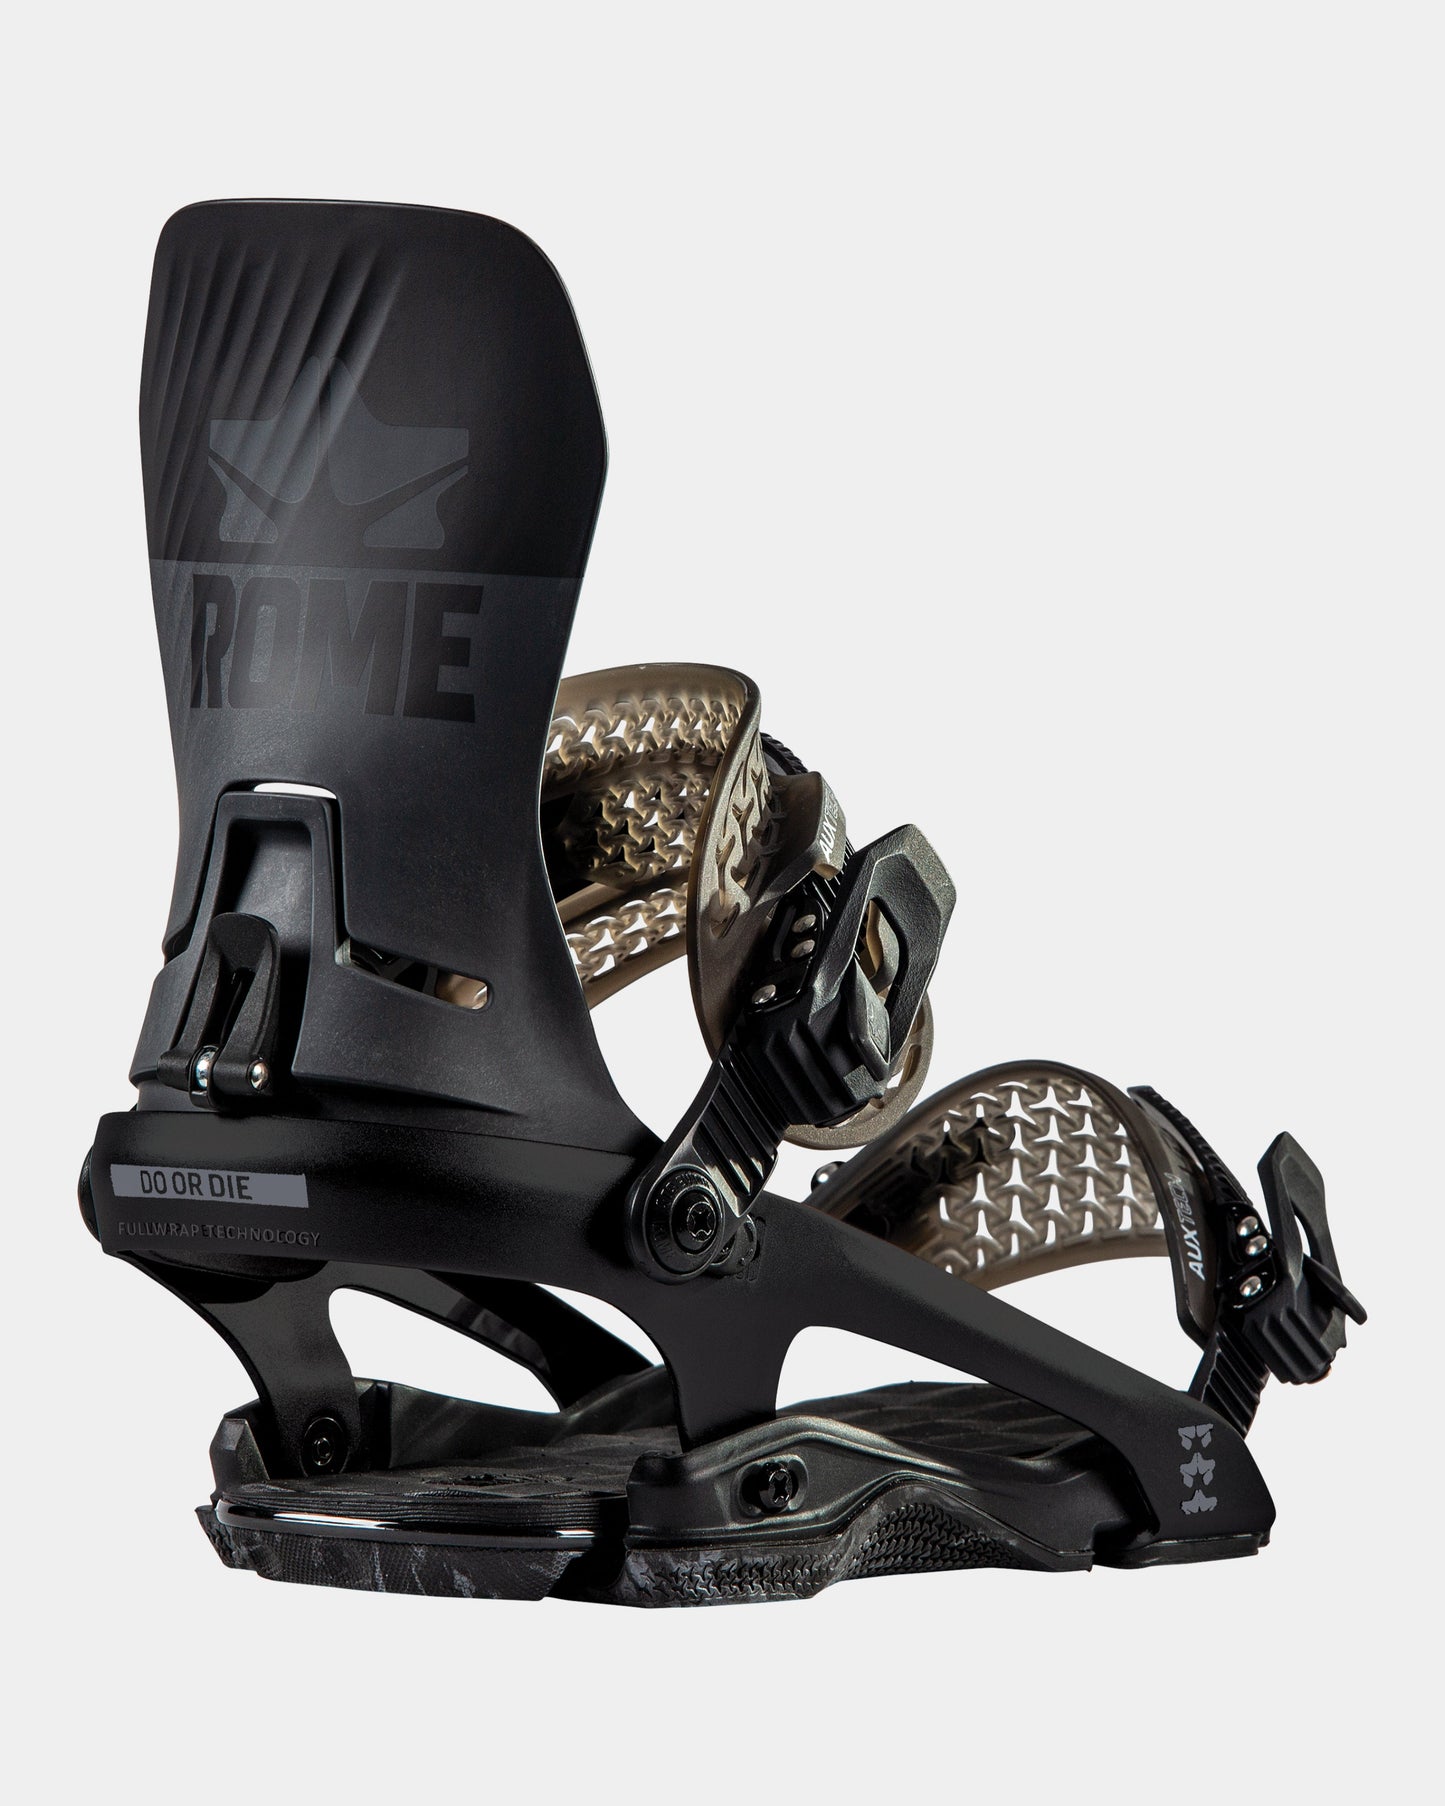 Rome dod 2023 mens snowboard bindings product photo from the front cover shot in the studio color black